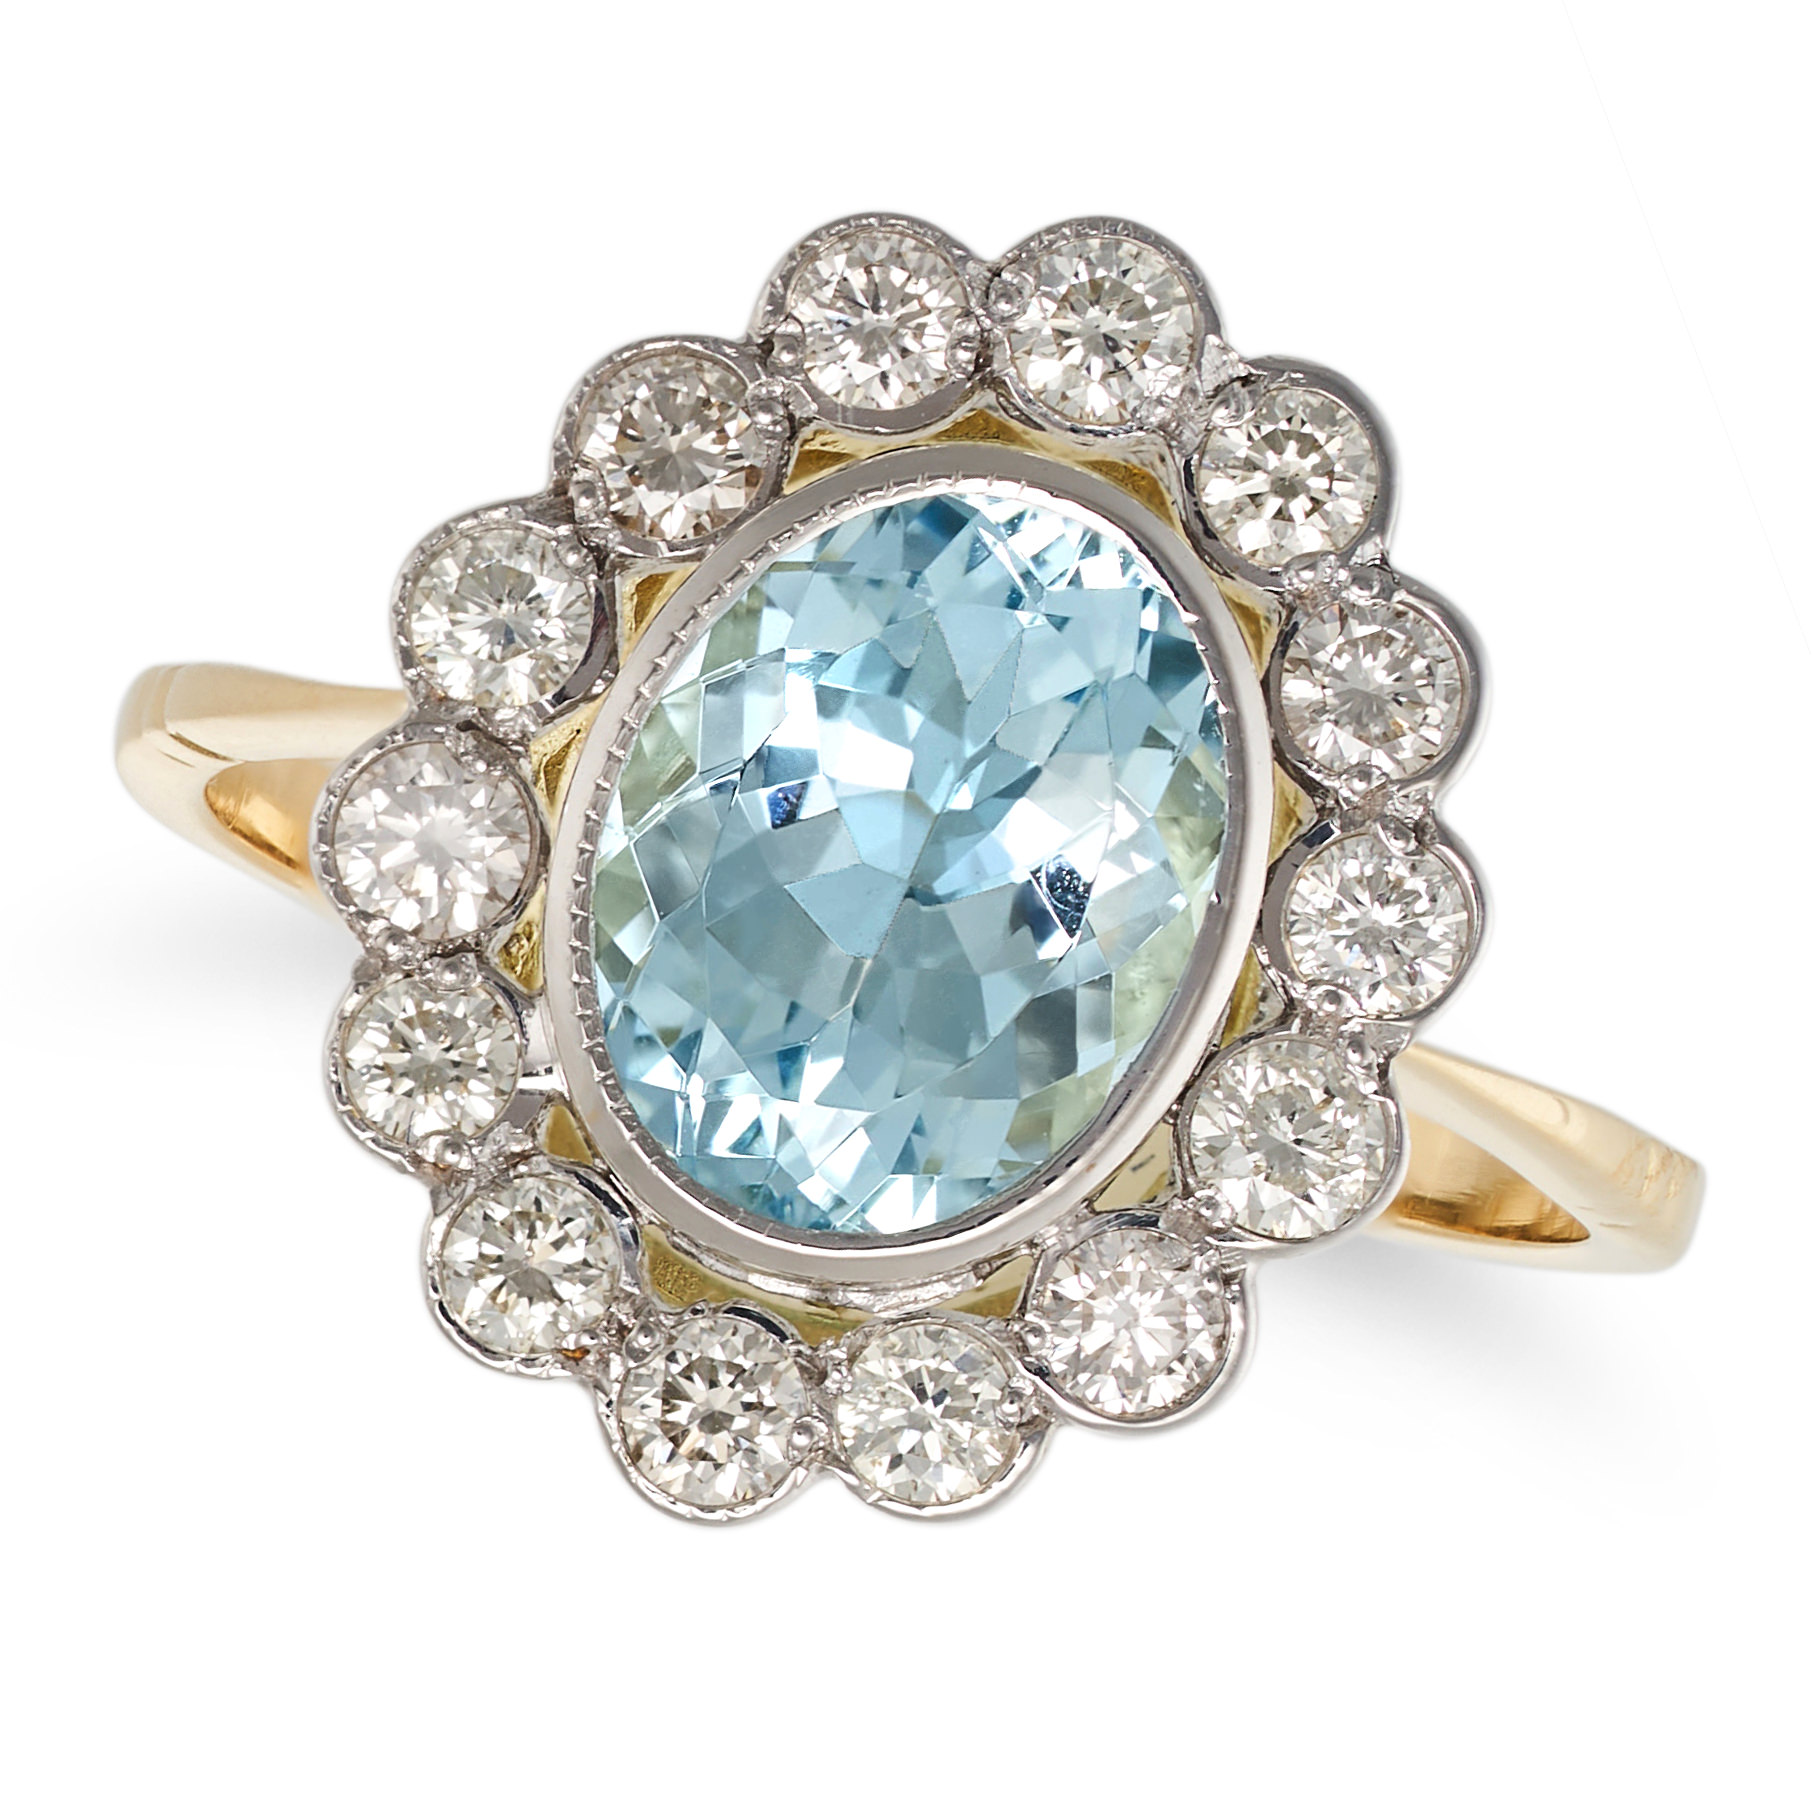 AN AQUAMARINE AND DIAMOND CLUSTER RING in 18ct yellow and white gold, set with an oval cut aquama...